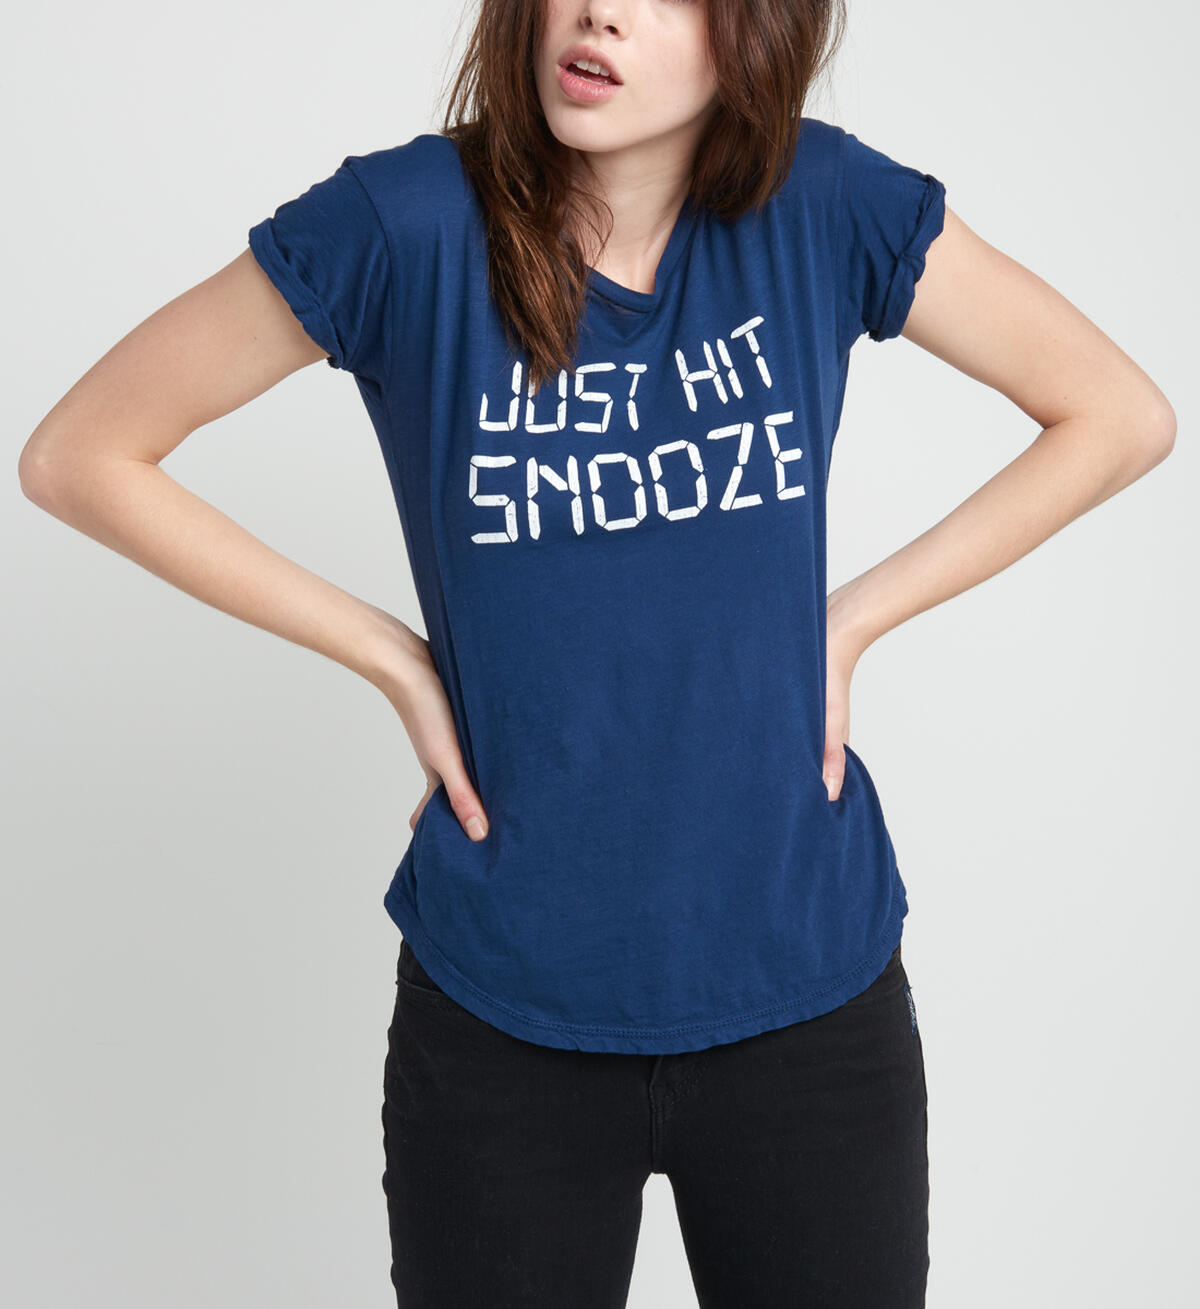 Hit Snooze Graphic Tee Final Sale, , hi-res image number 0